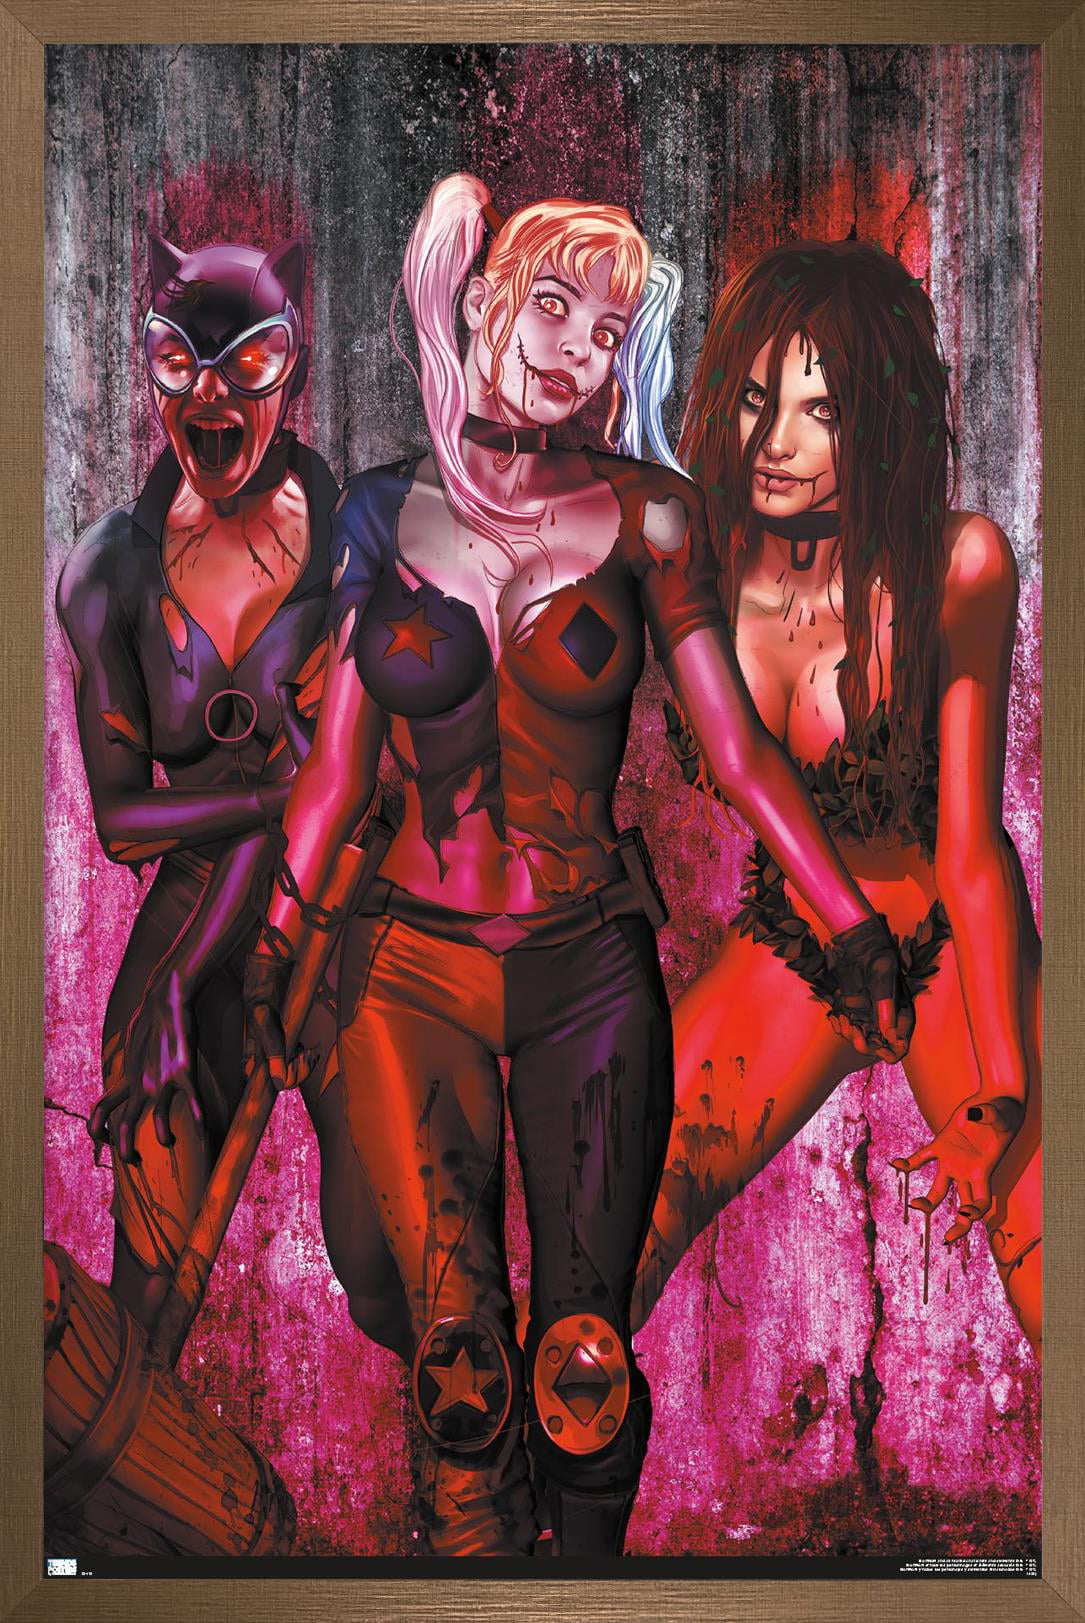 DC Comics - Harley Quinn - DCeased #1 Variant Wall Poster, 22.375